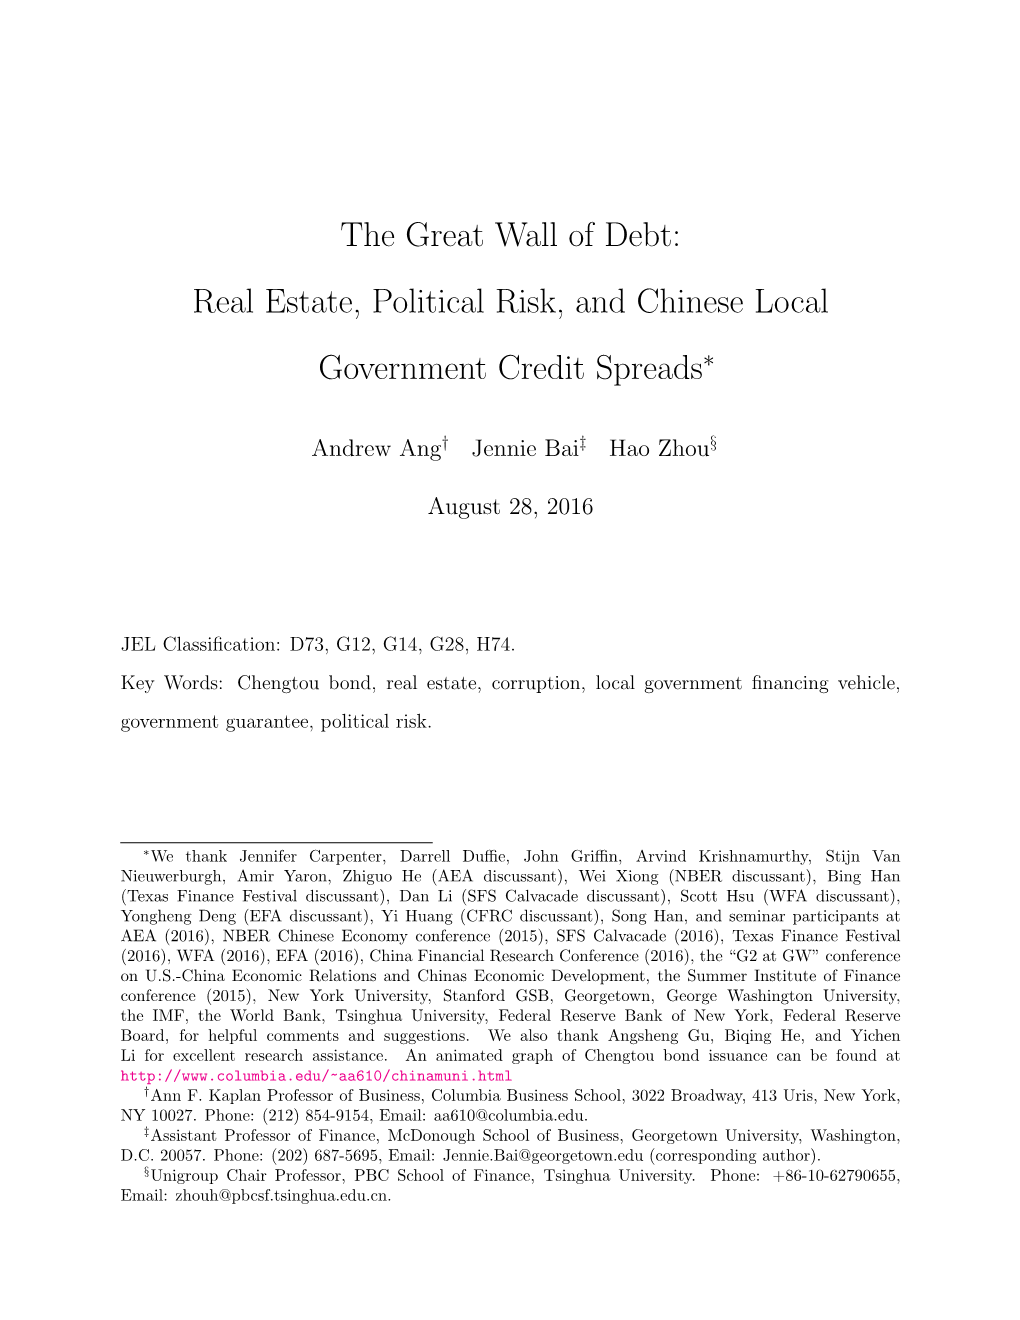 The Great Wall of Debt: Real Estate, Political Risk, and Chinese Local Government Credit Spreads∗